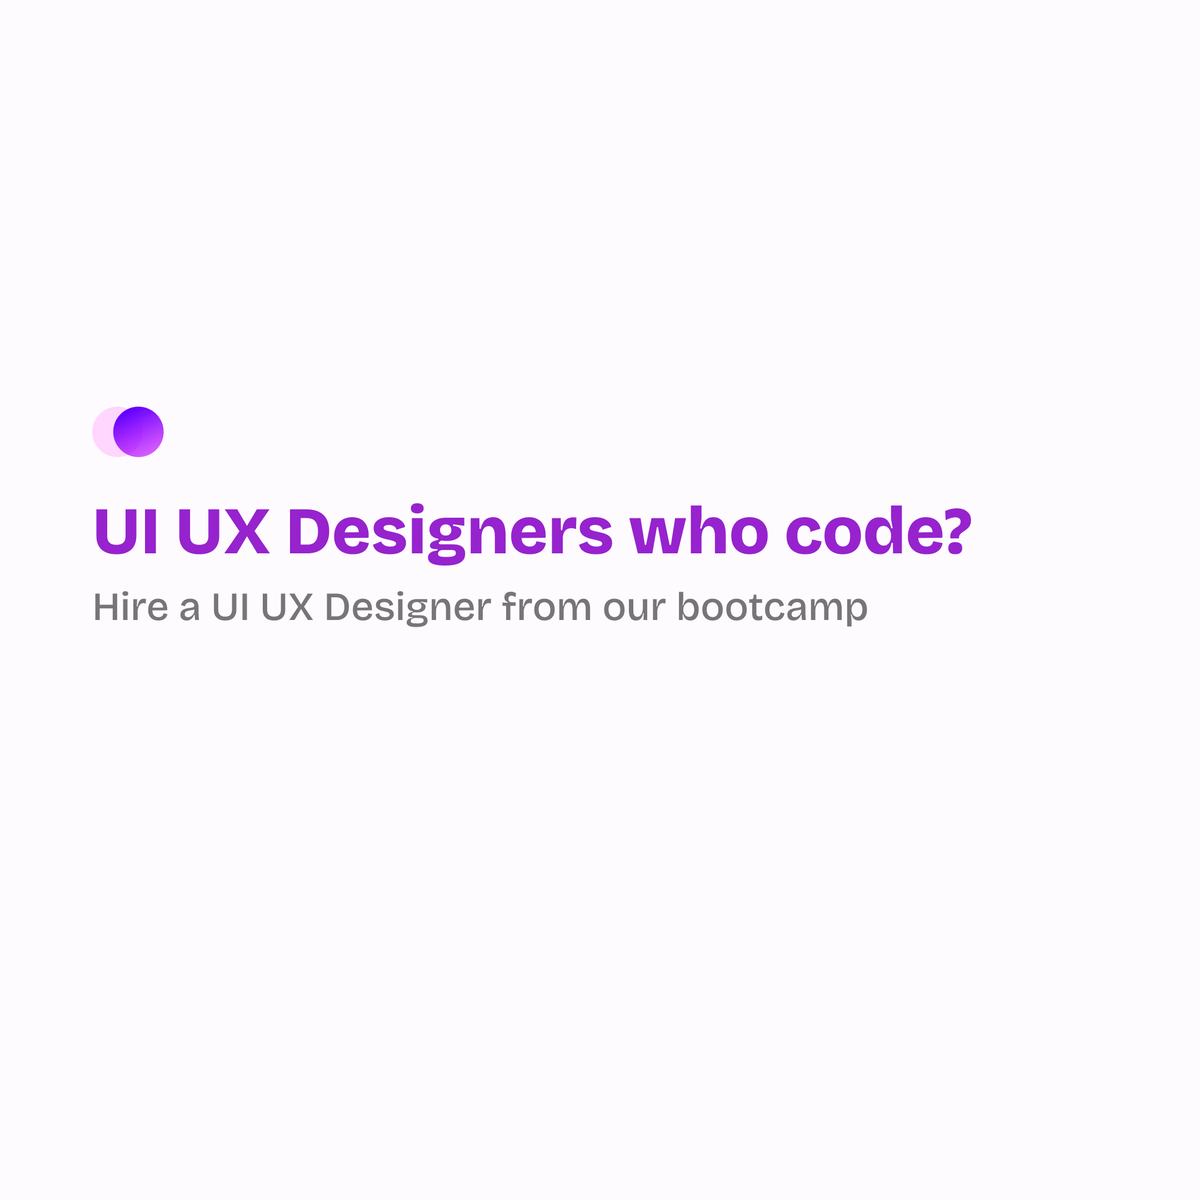 If you are seeing this post Kindly Retweet it. Retweet it for organizations who are engineering-led and will love to hire UI UX Designers that can code Retweet it for organizations who love to design & build in the same pipeline